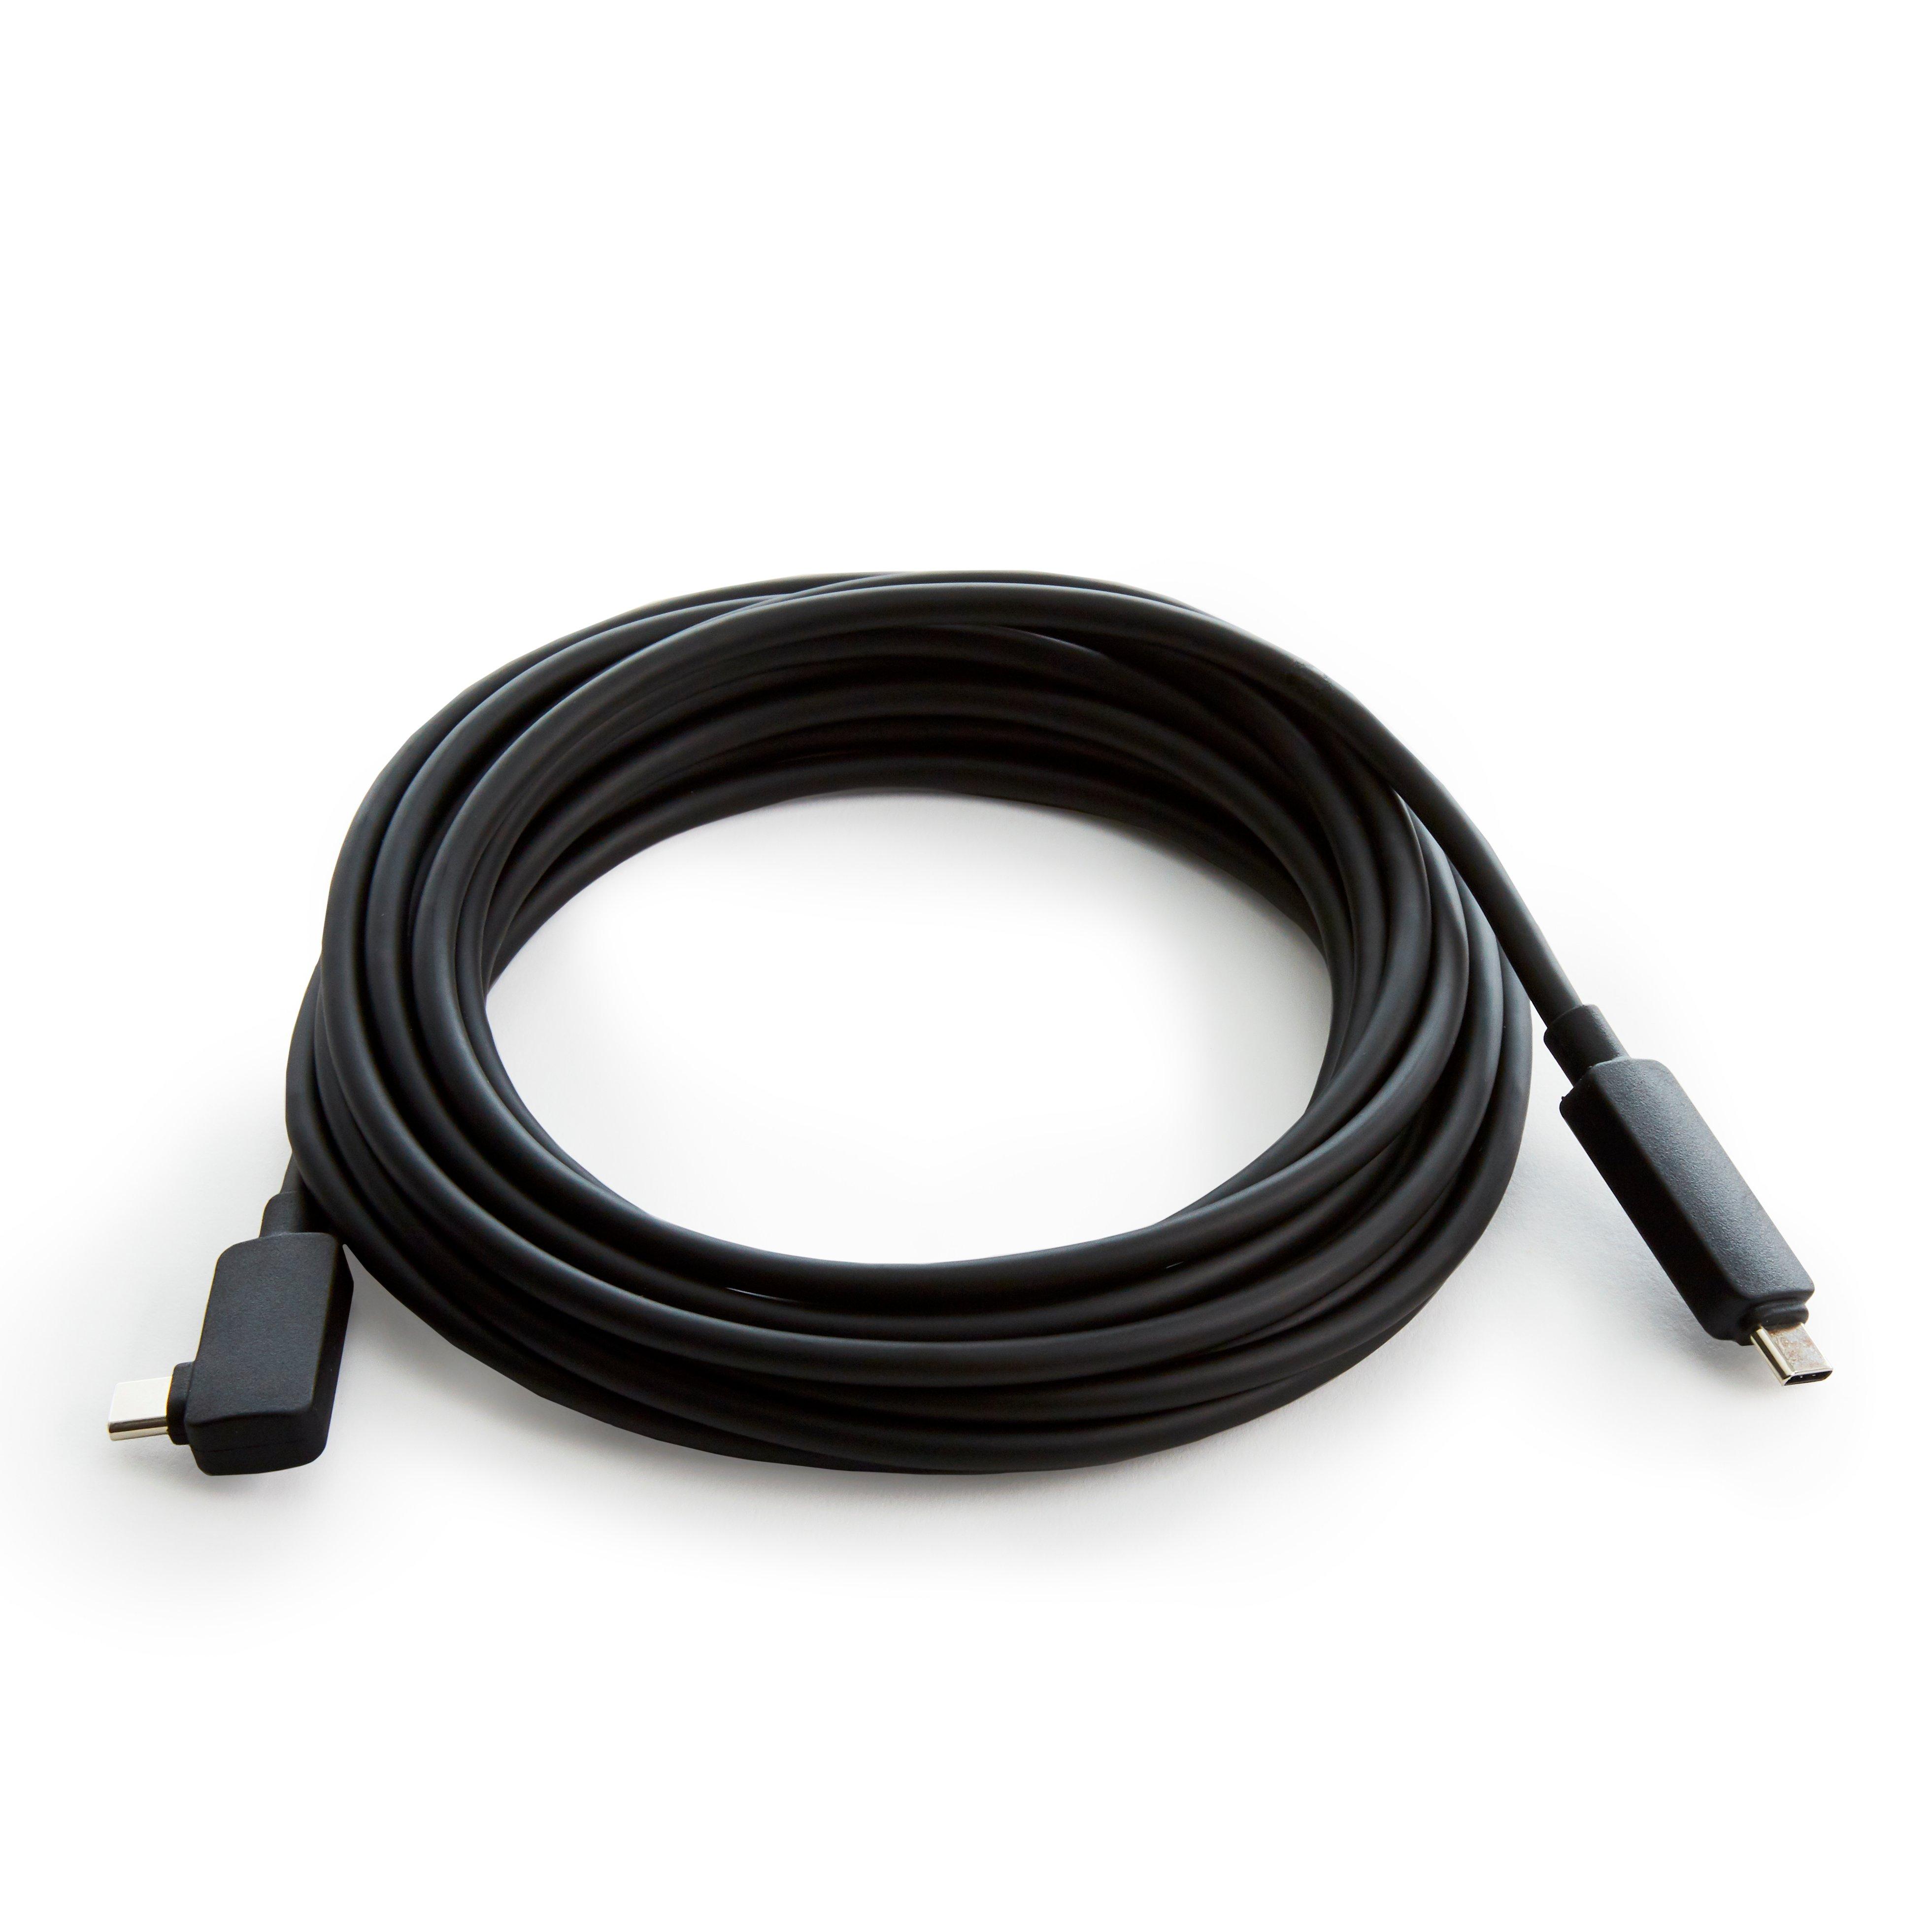 Oculus Link Cable(Fiber-Optic, 16ft) for Oculus Quest 3 with USB-C